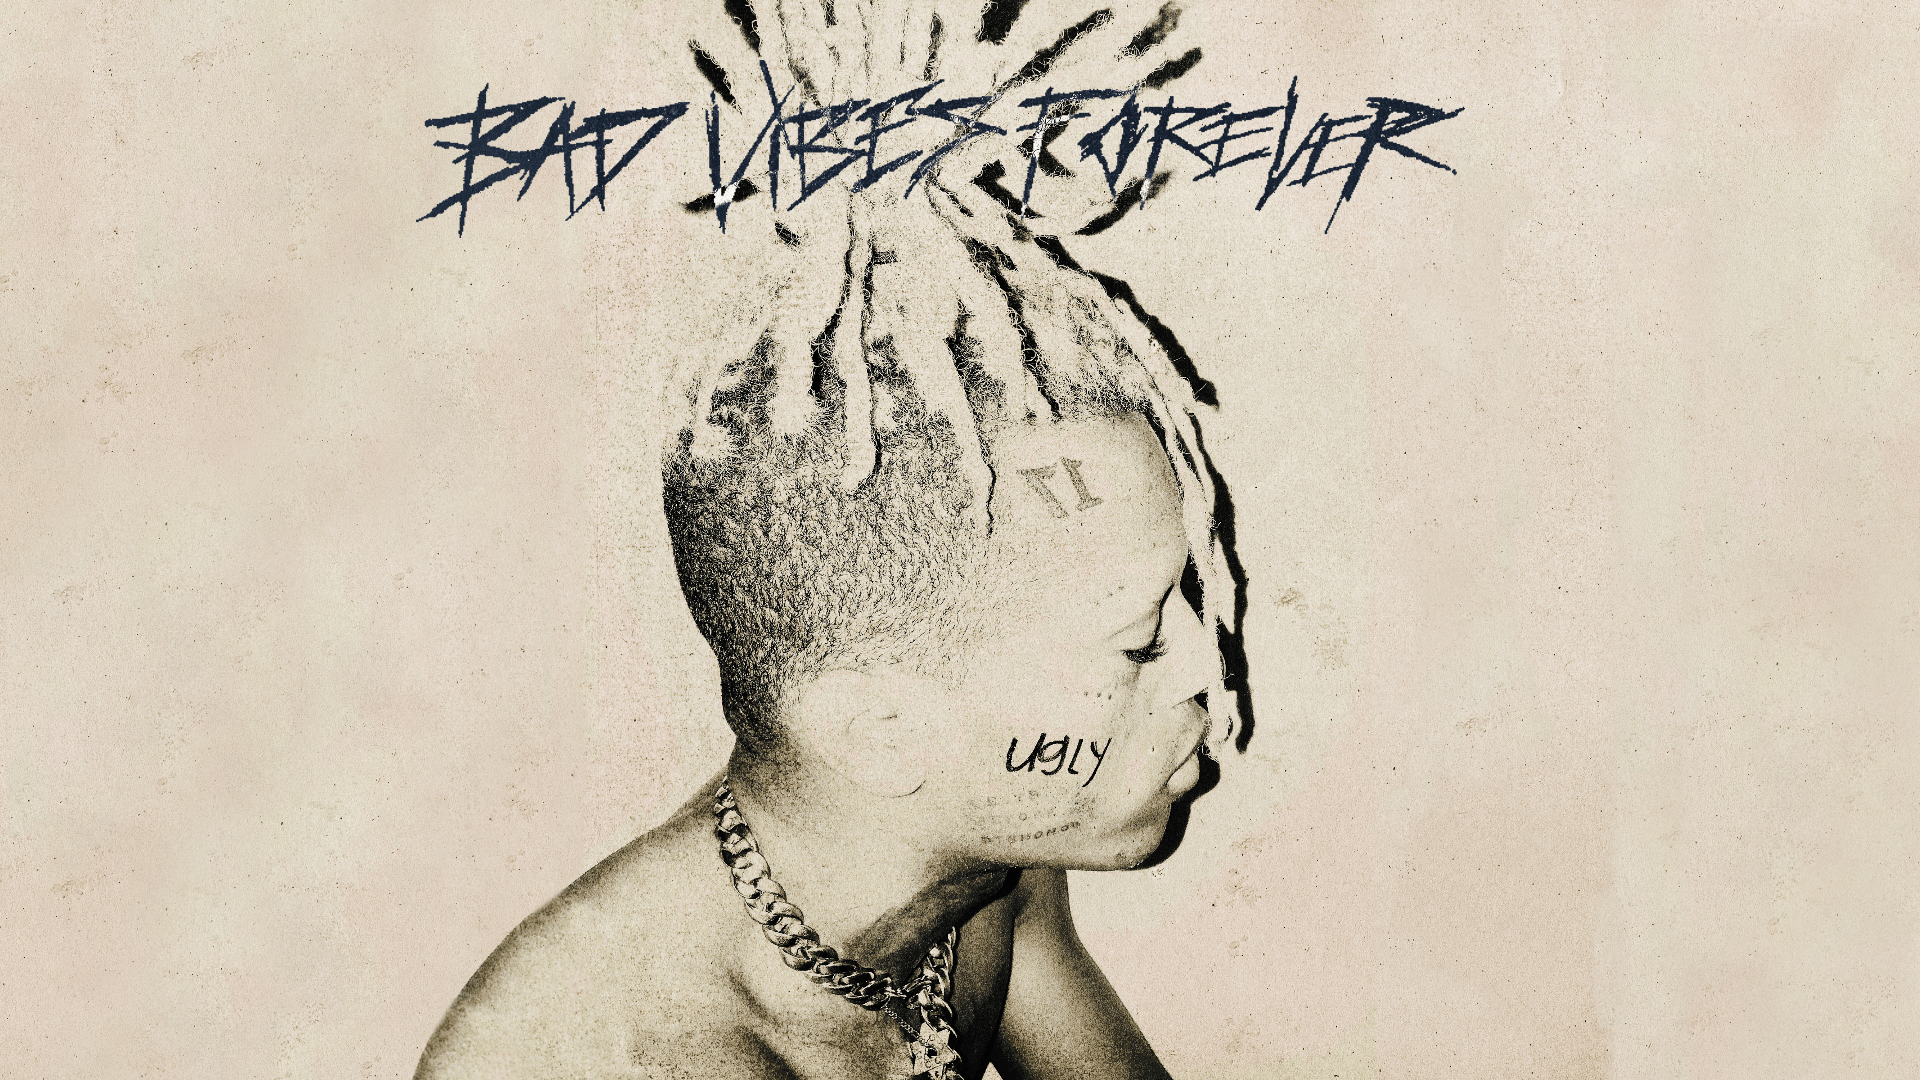 Tons of awesome XXXTentacion Bad Vibes Forever wallpapers to download for f...